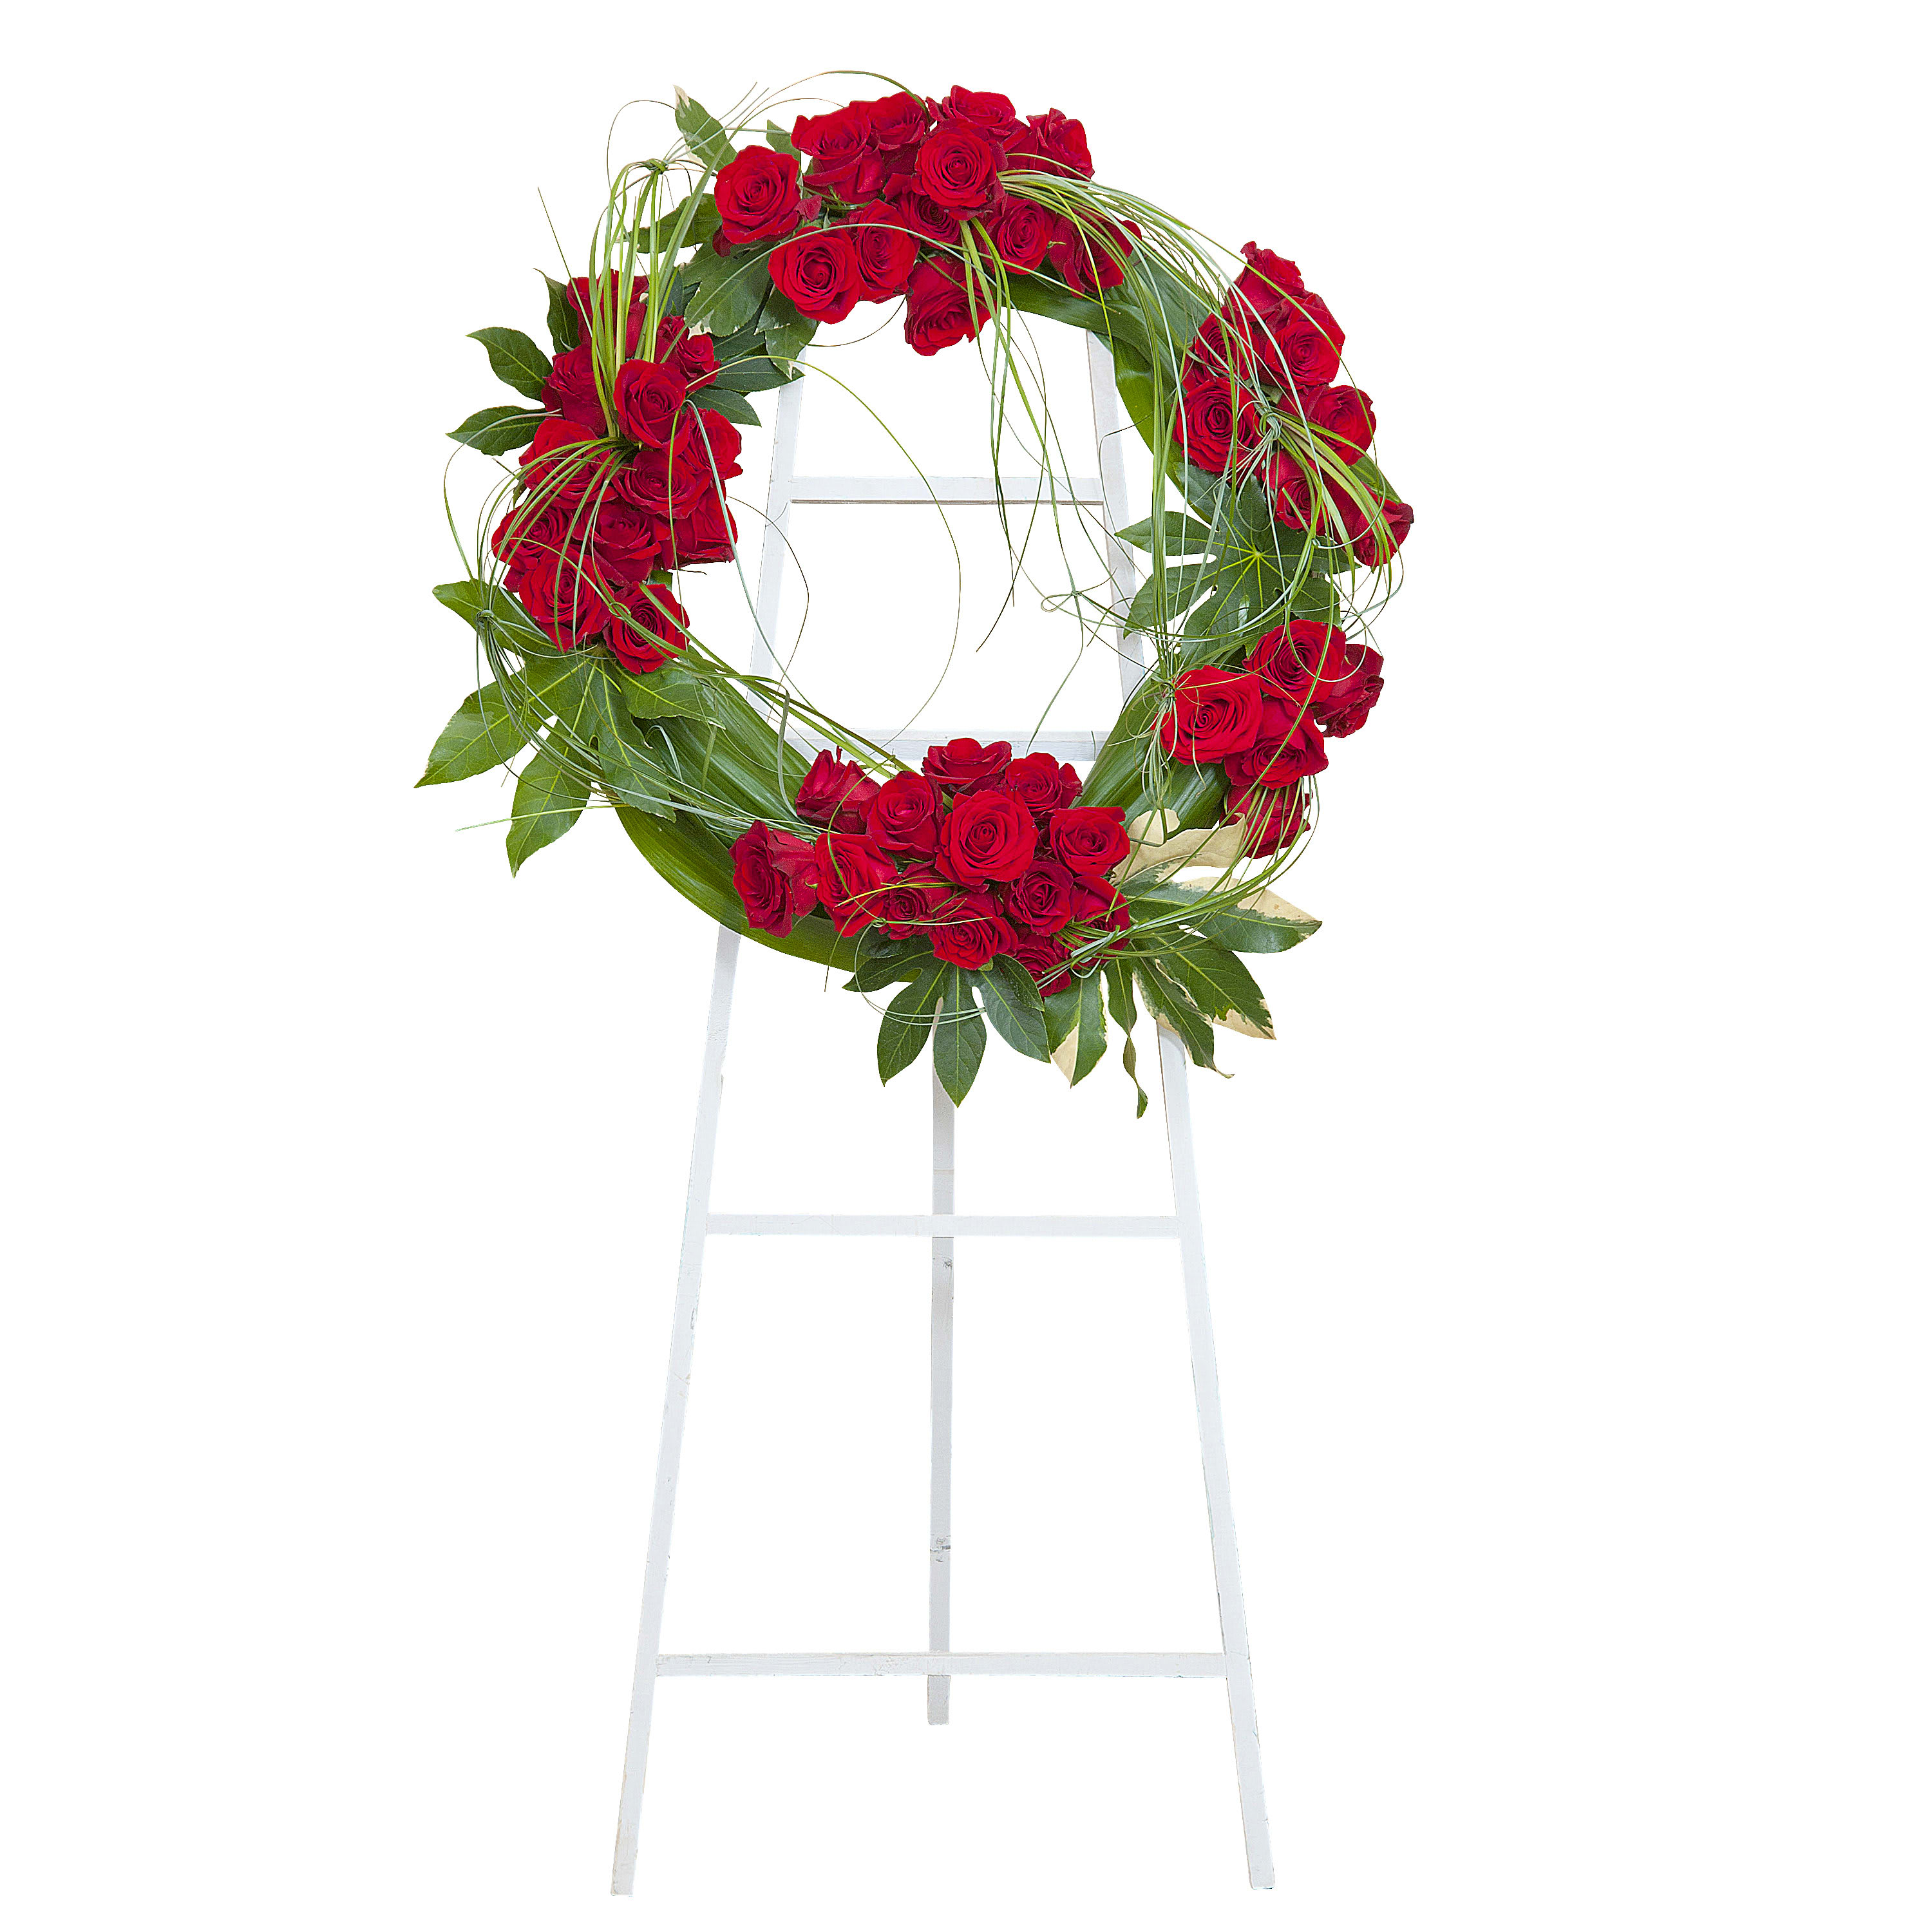 Royal Wreath - A wreath with red Roses and foliage fit for the royal tribute.